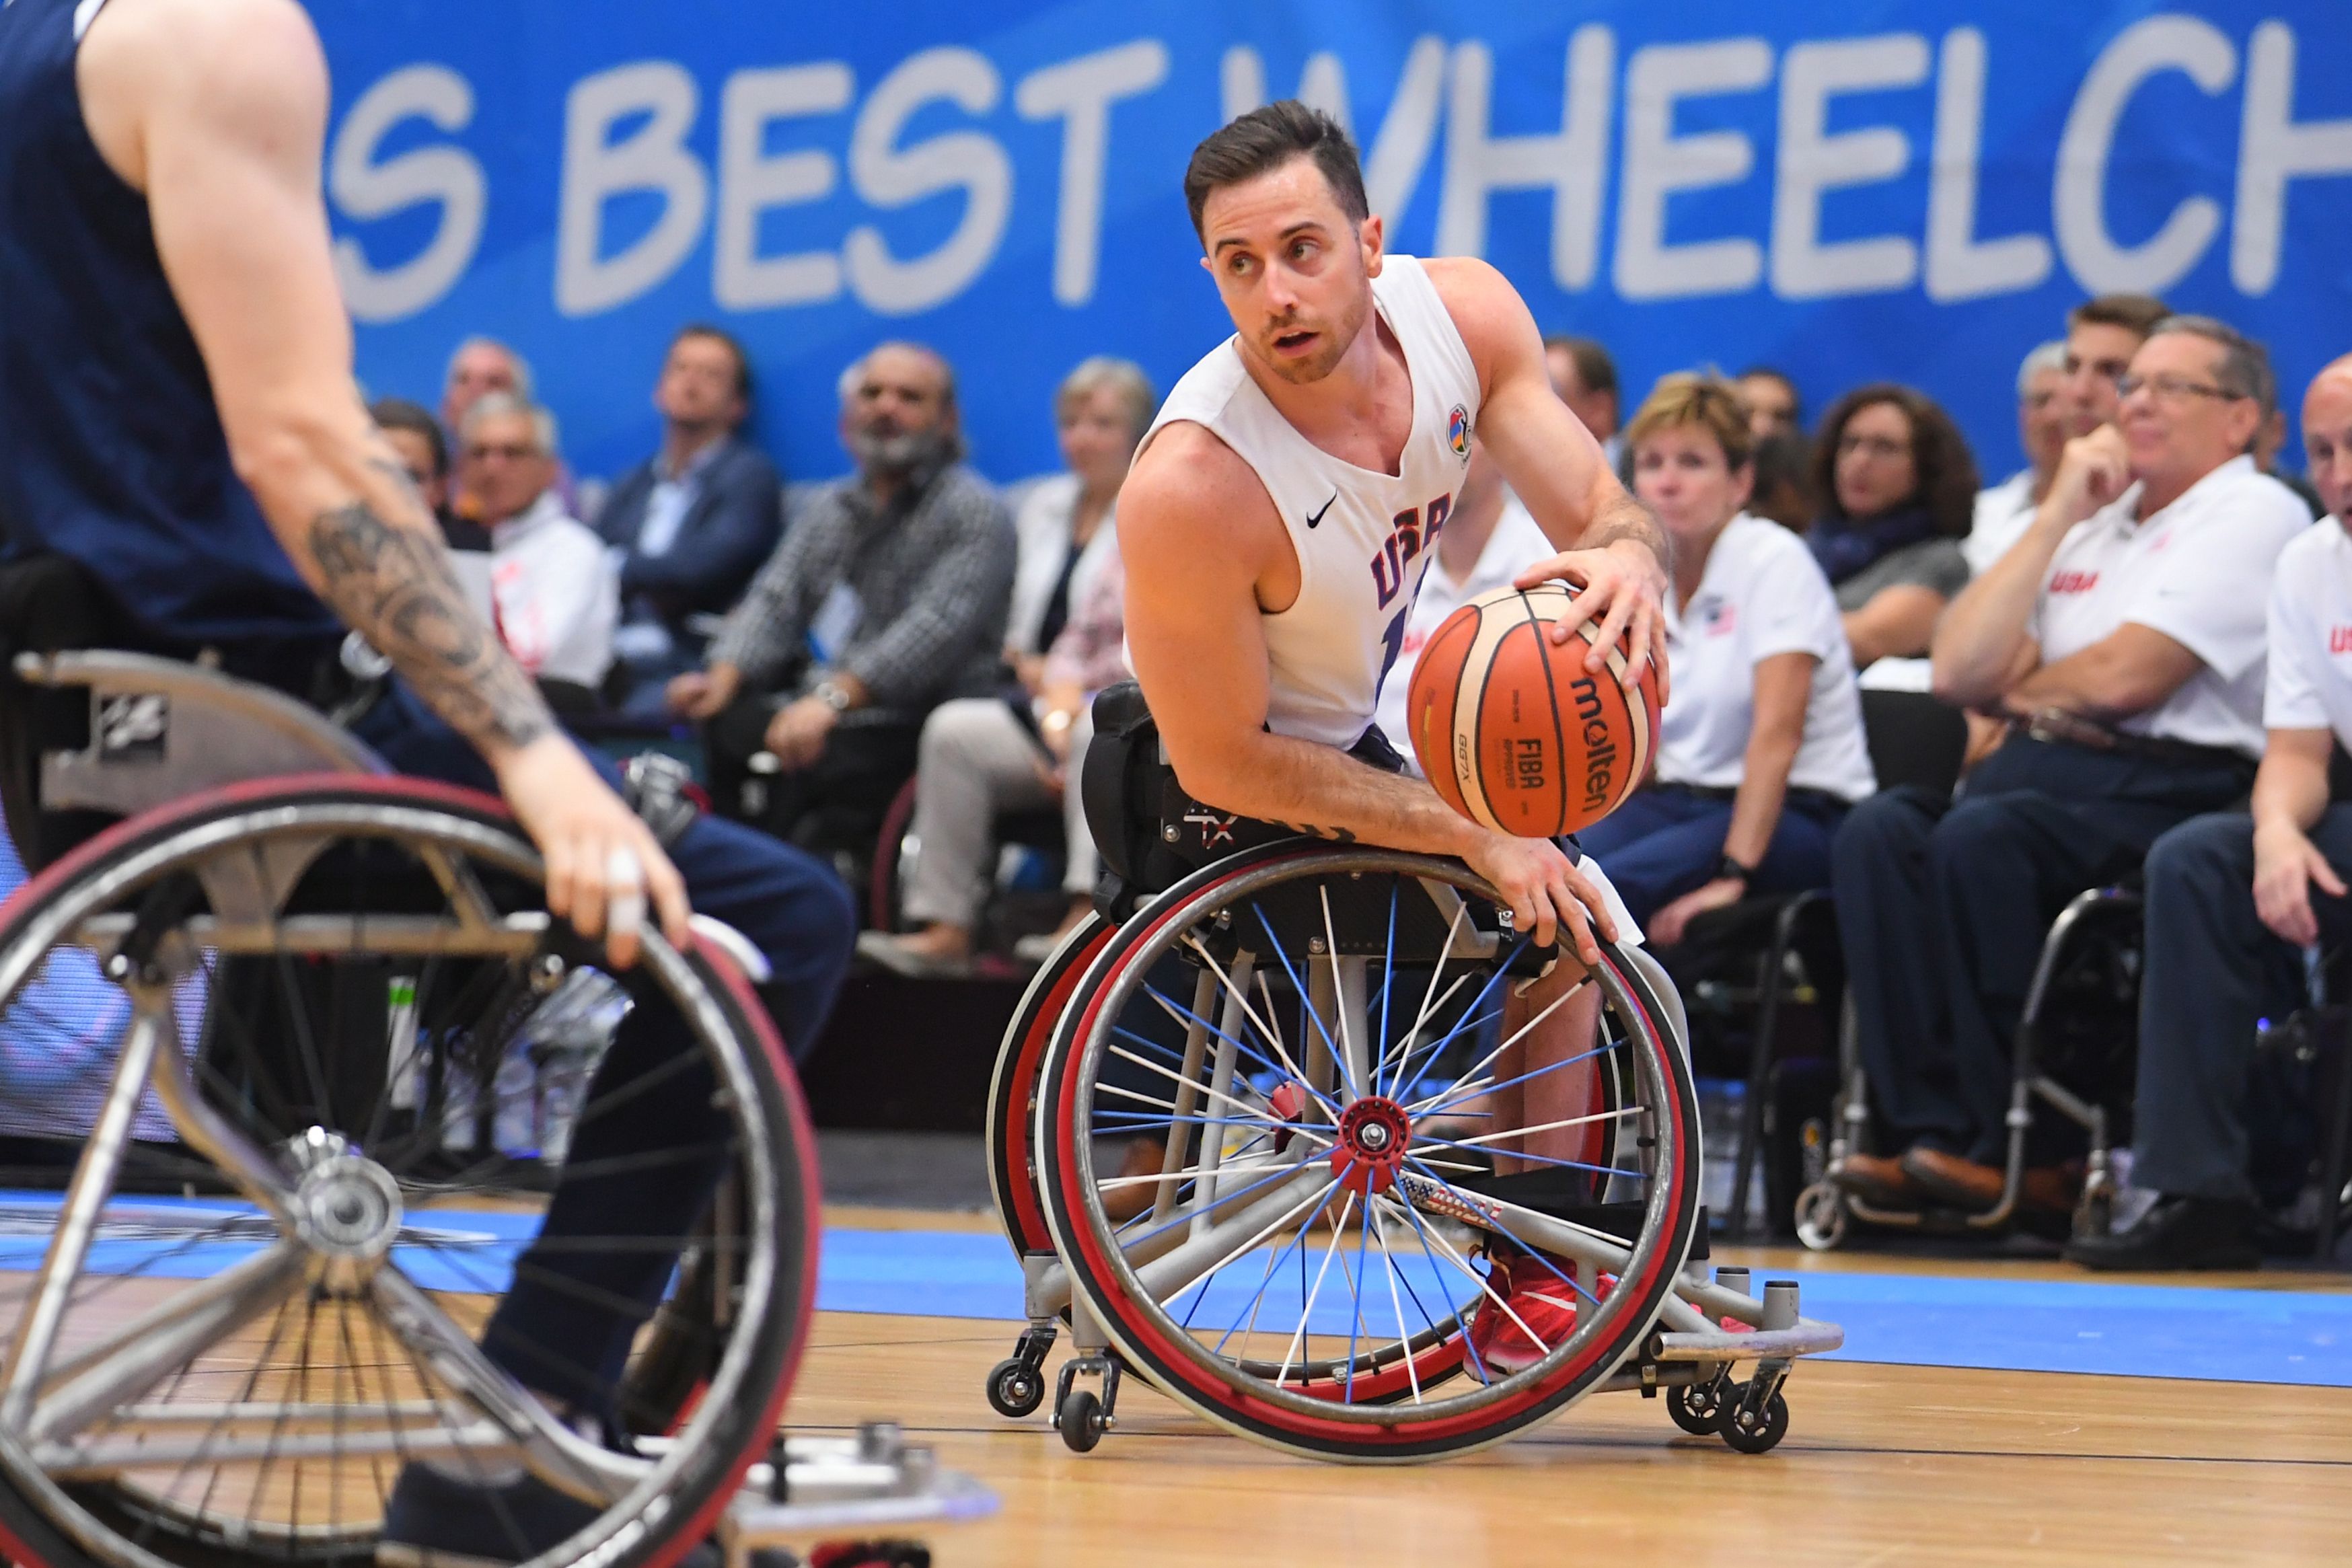 Steve Serio of the United States in action in the Men's final between Great Britain and USA during the Wheelchair Basketball World Championships